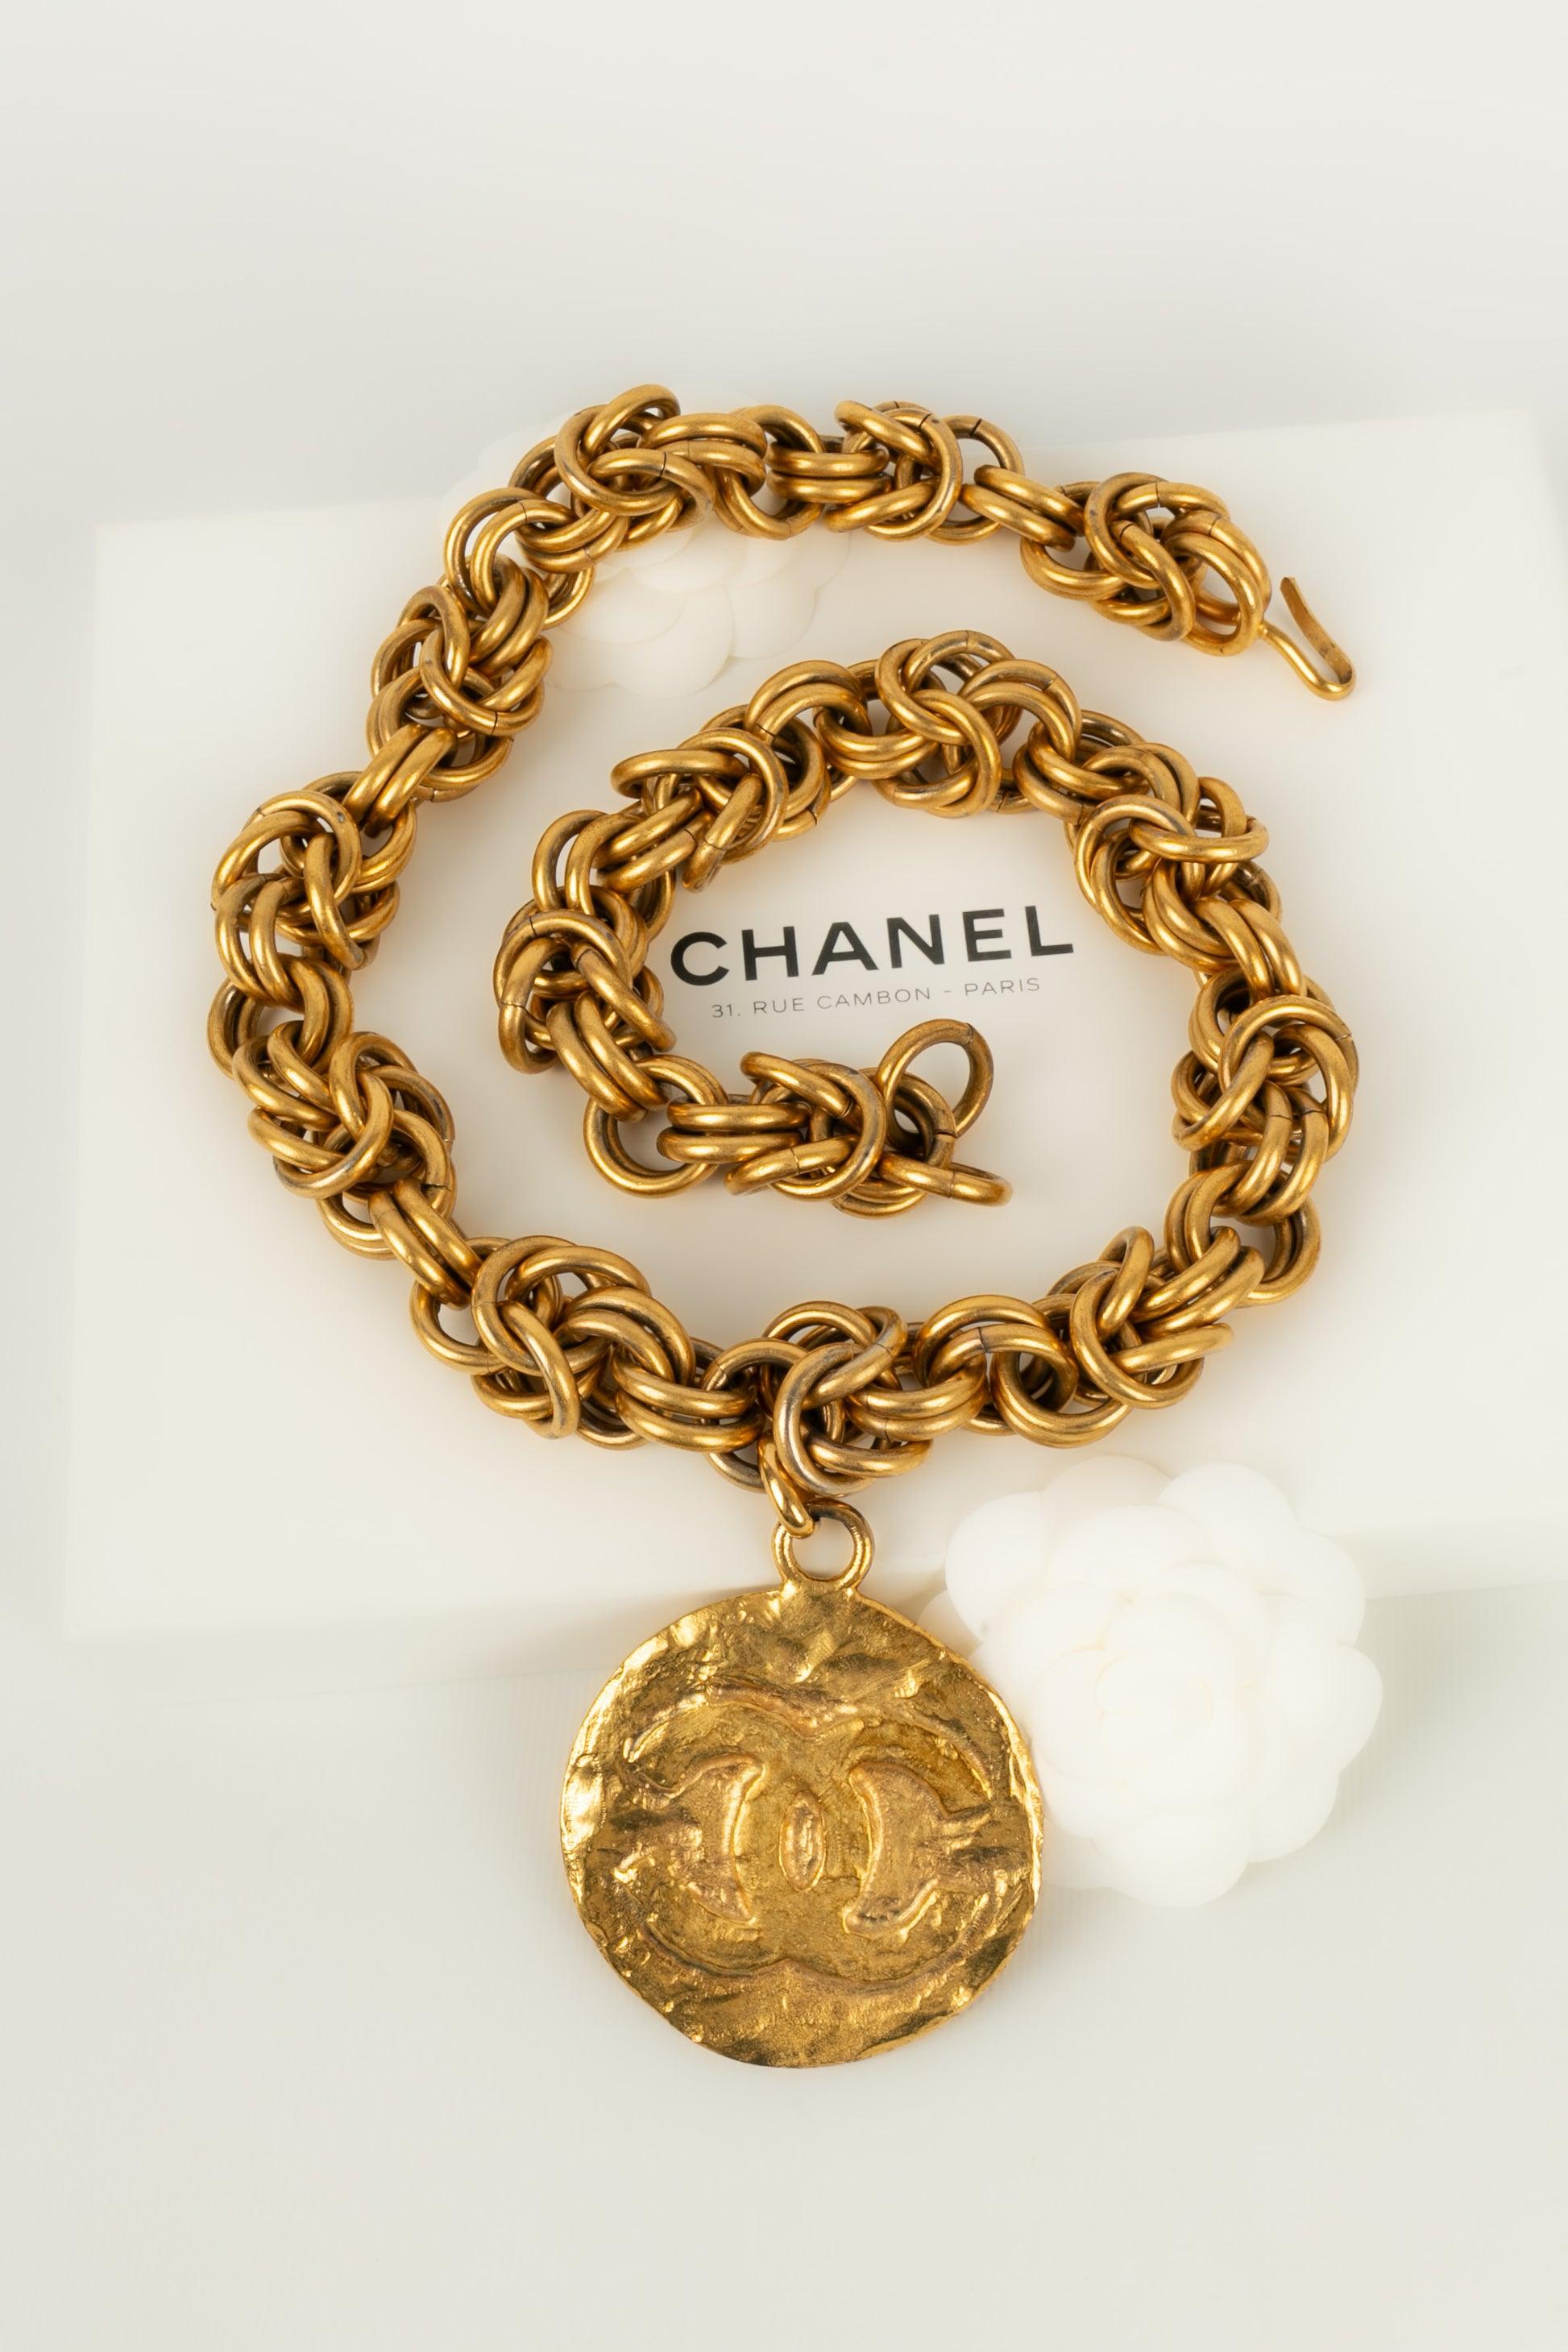 Chanel Impressive Haute Couture Necklace in Gold-Plated Metal with a CC Pendant For Sale 3